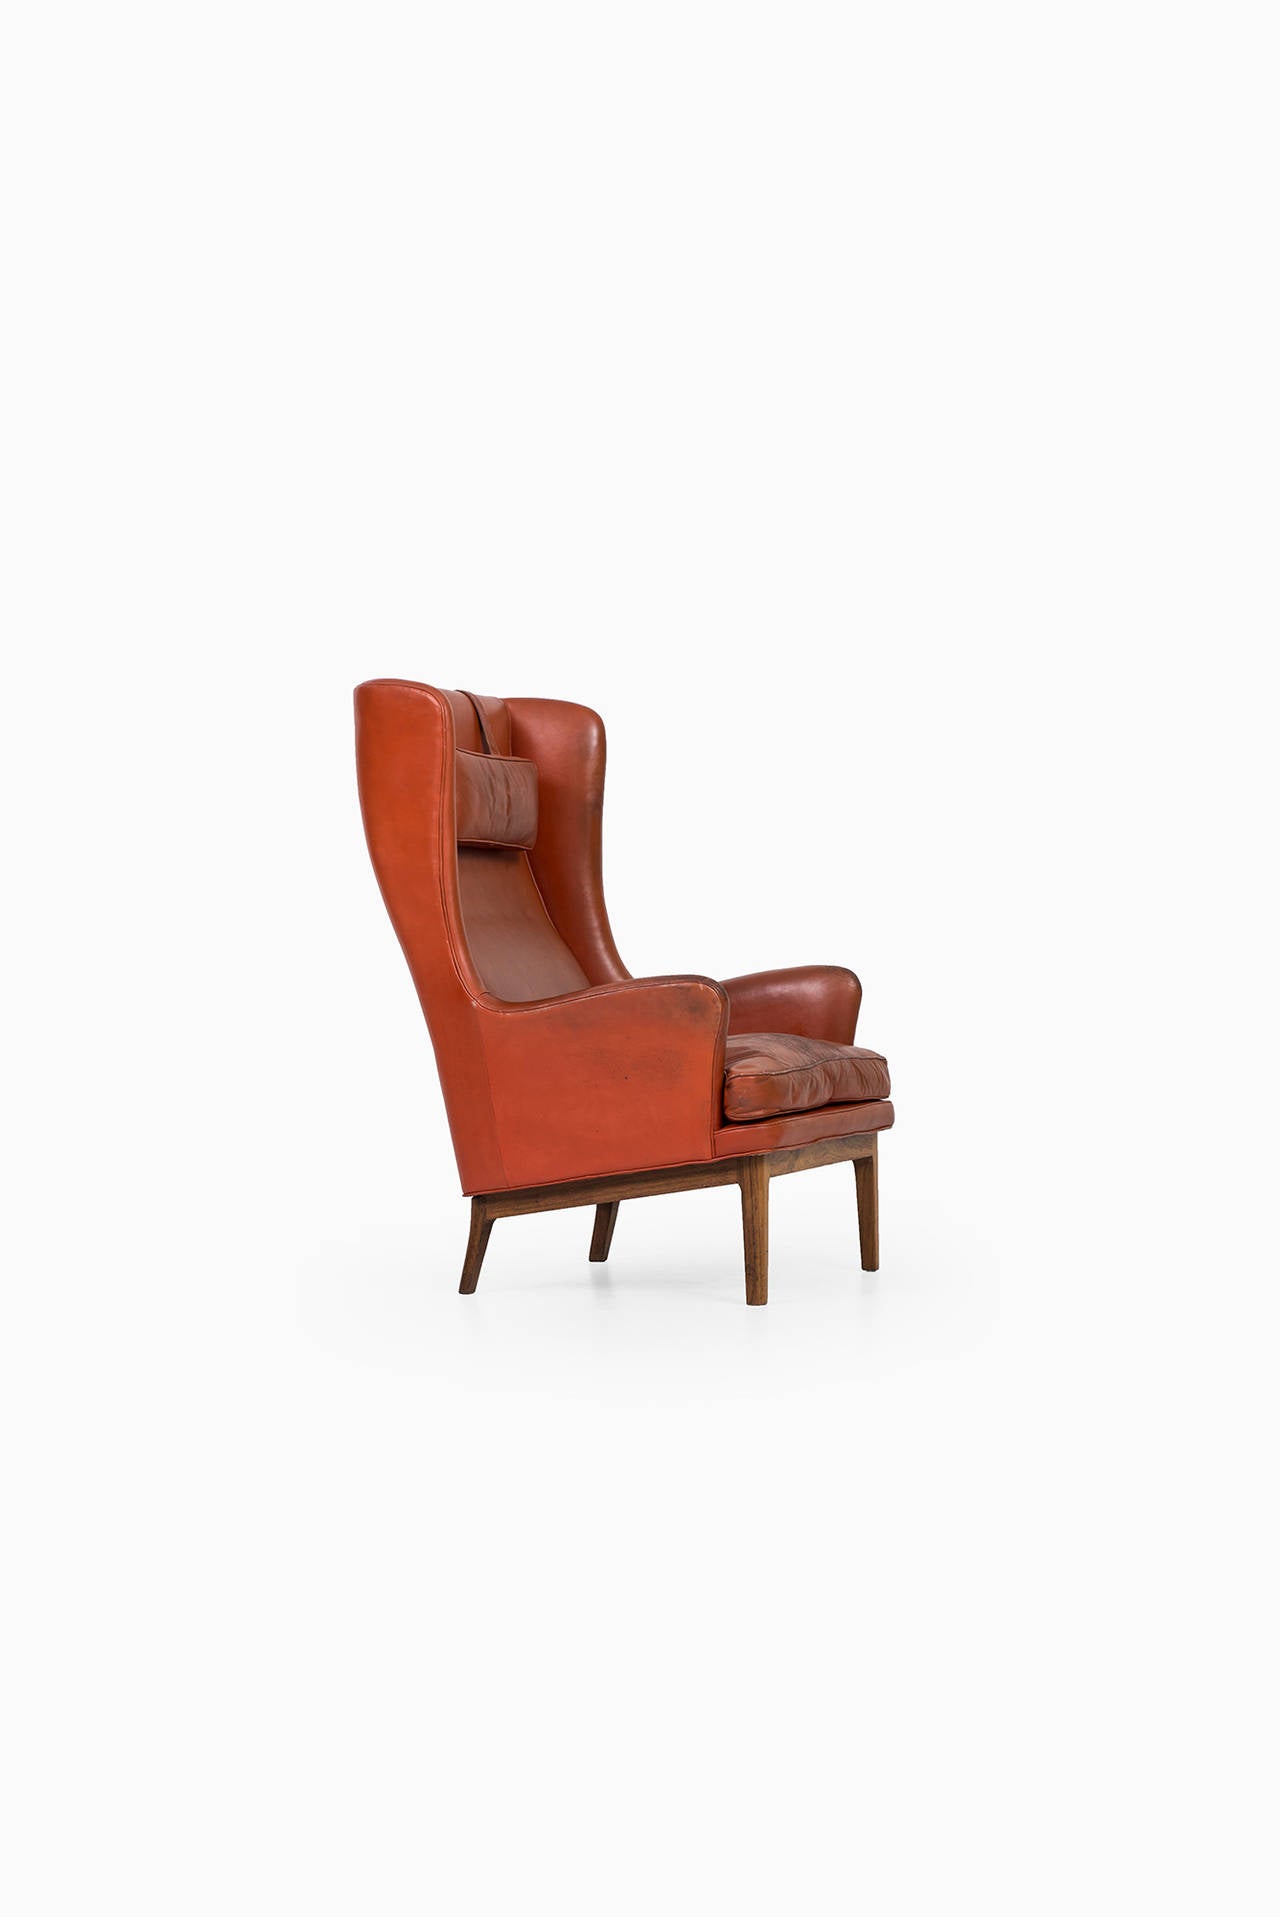 Rare wingback easy chair in rosewood and red leather designed by Arne Norell. Produced by Arne Norell AB in Aneby, Sweden.